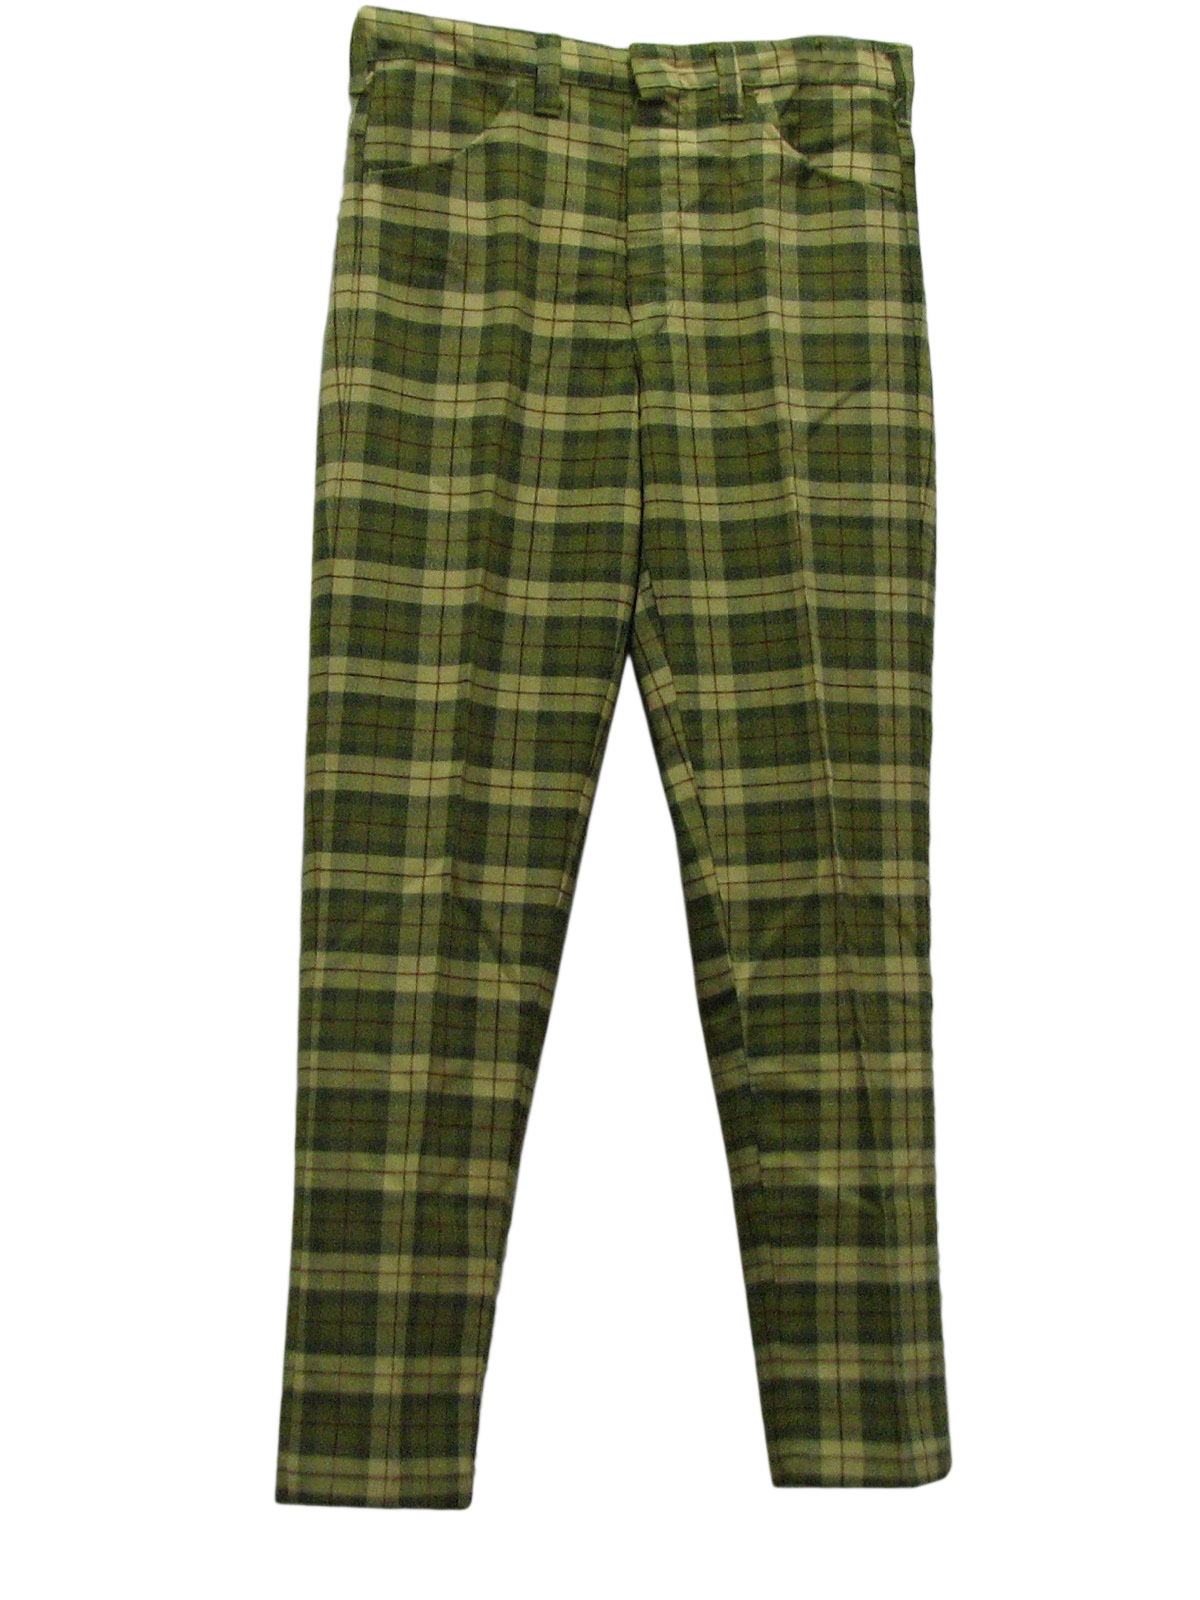 70s Vintage Pants: 70s -No Label- Mens yellow, burgundy, and green ...